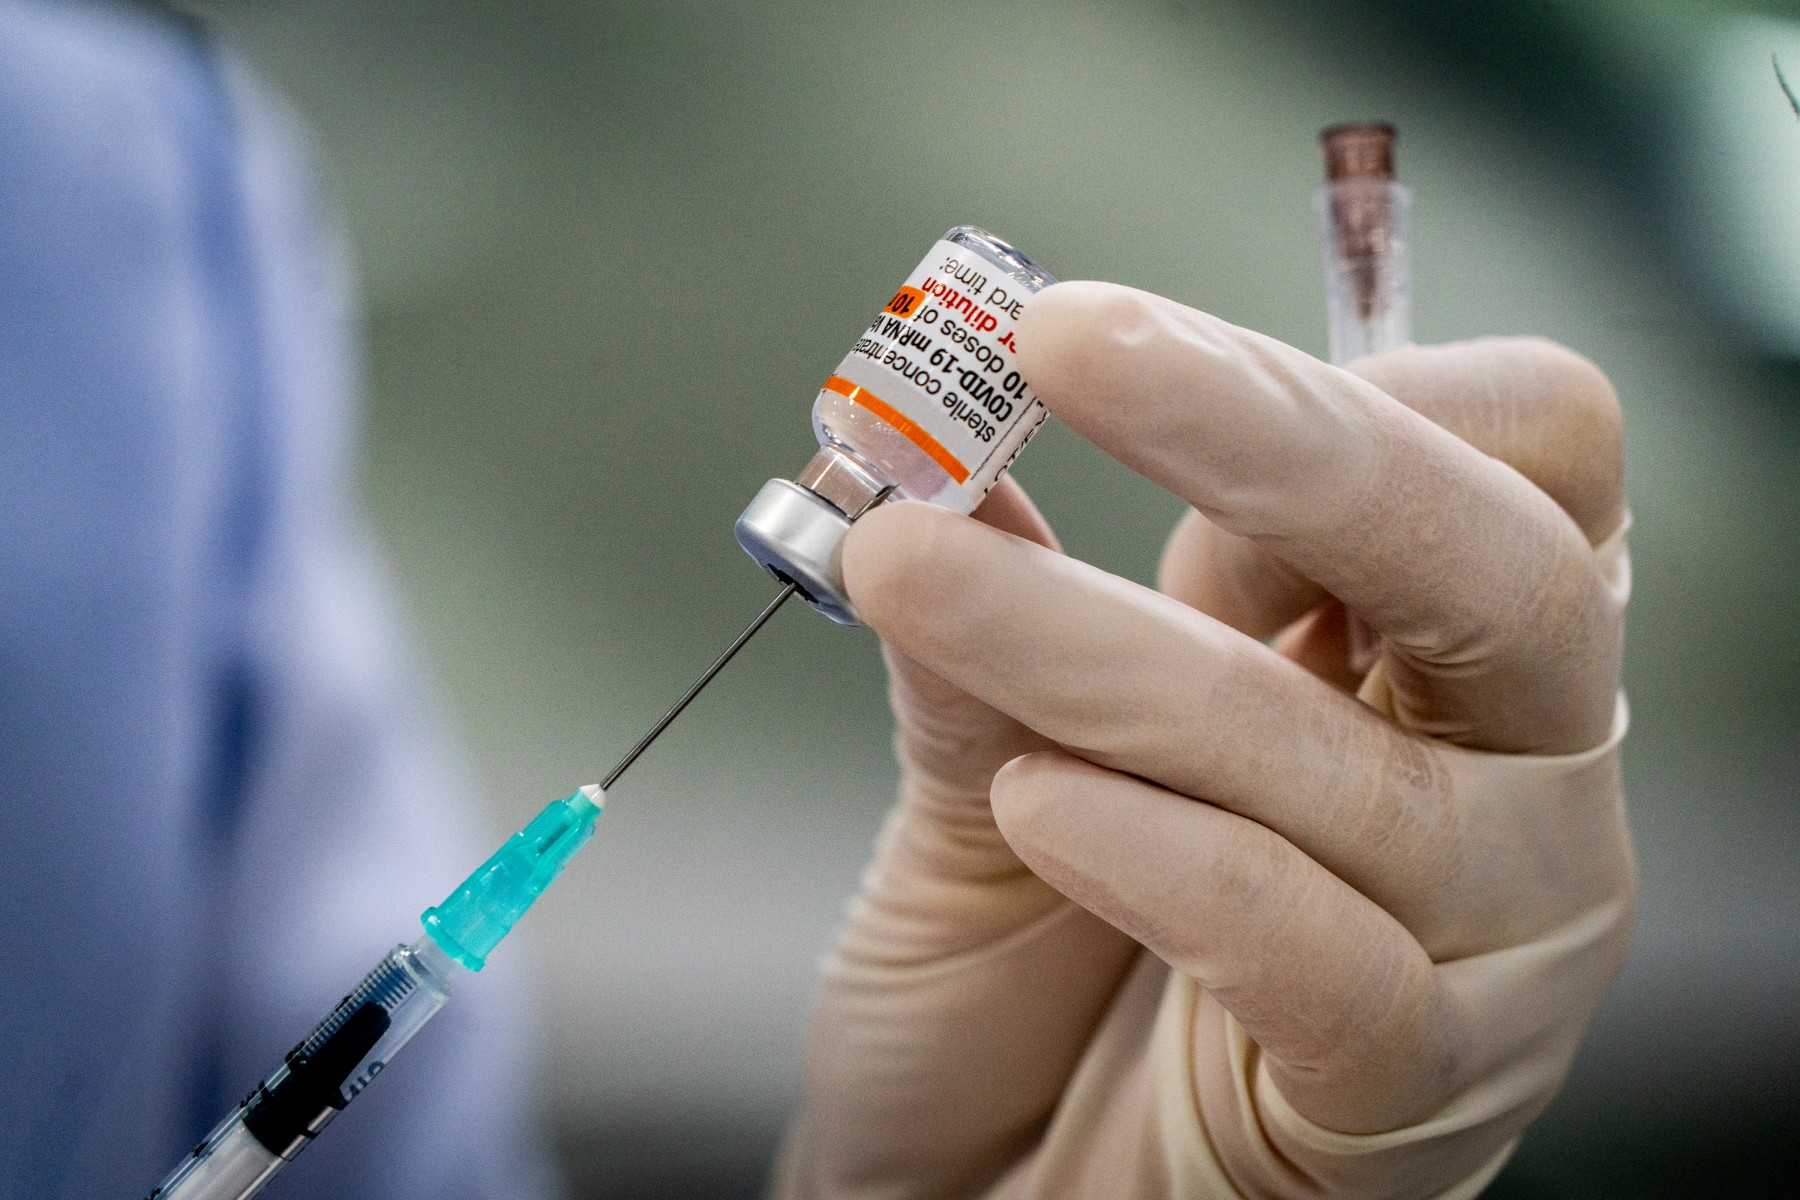 Pfizer-BioNTech COVID-19 vaccine doses being prepared by a medical worker wearing latex gloves
Photo: Matt Hunt/Getty Images

Photo: Matt Hunt/Getty Images